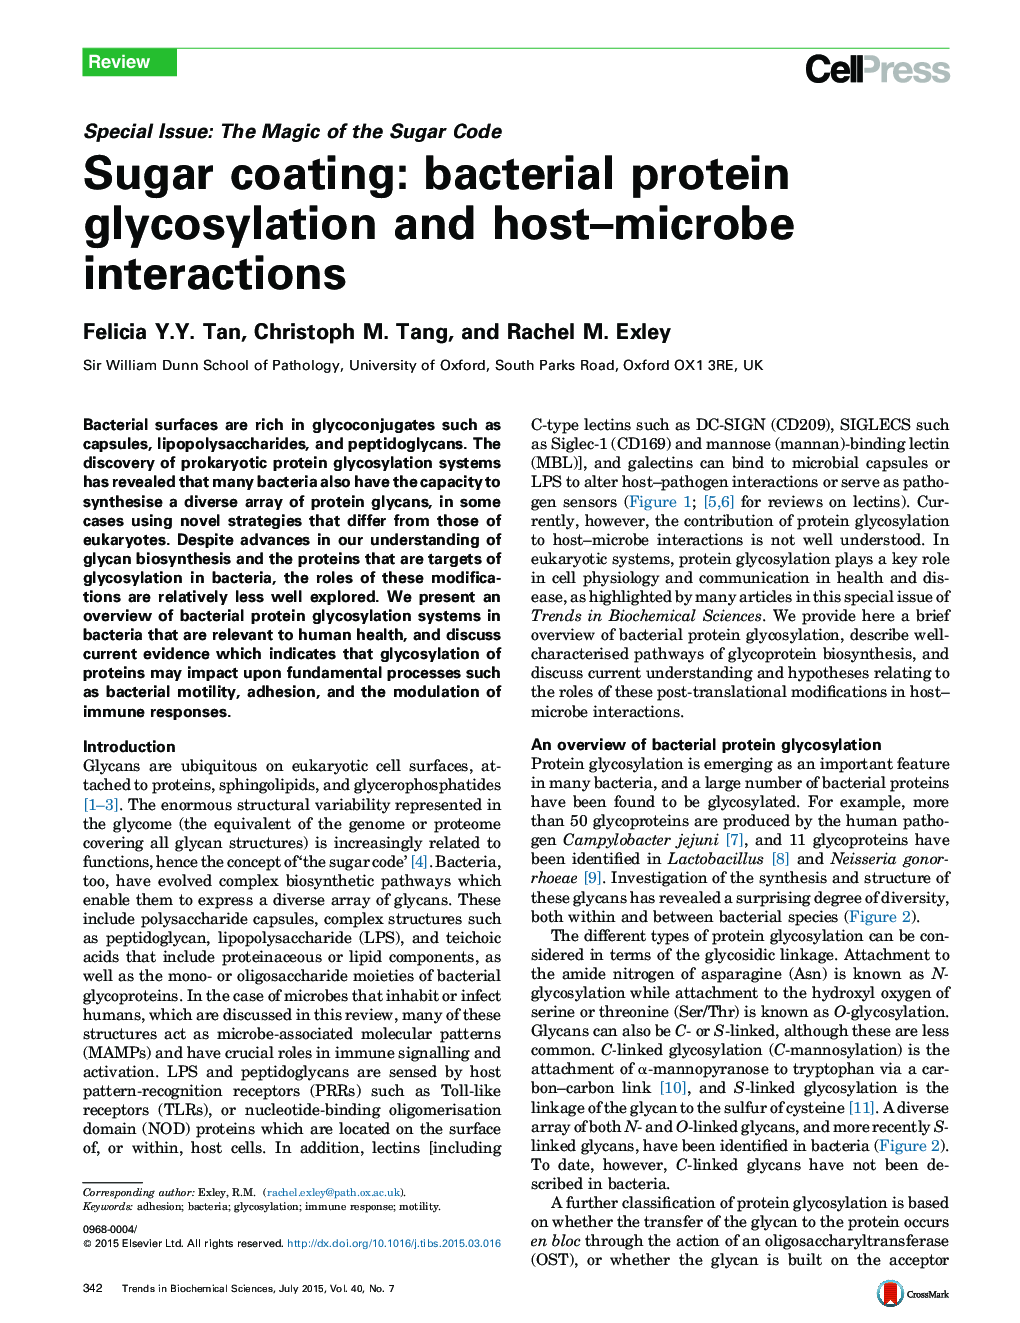 Sugar coating: bacterial protein glycosylation and host–microbe interactions